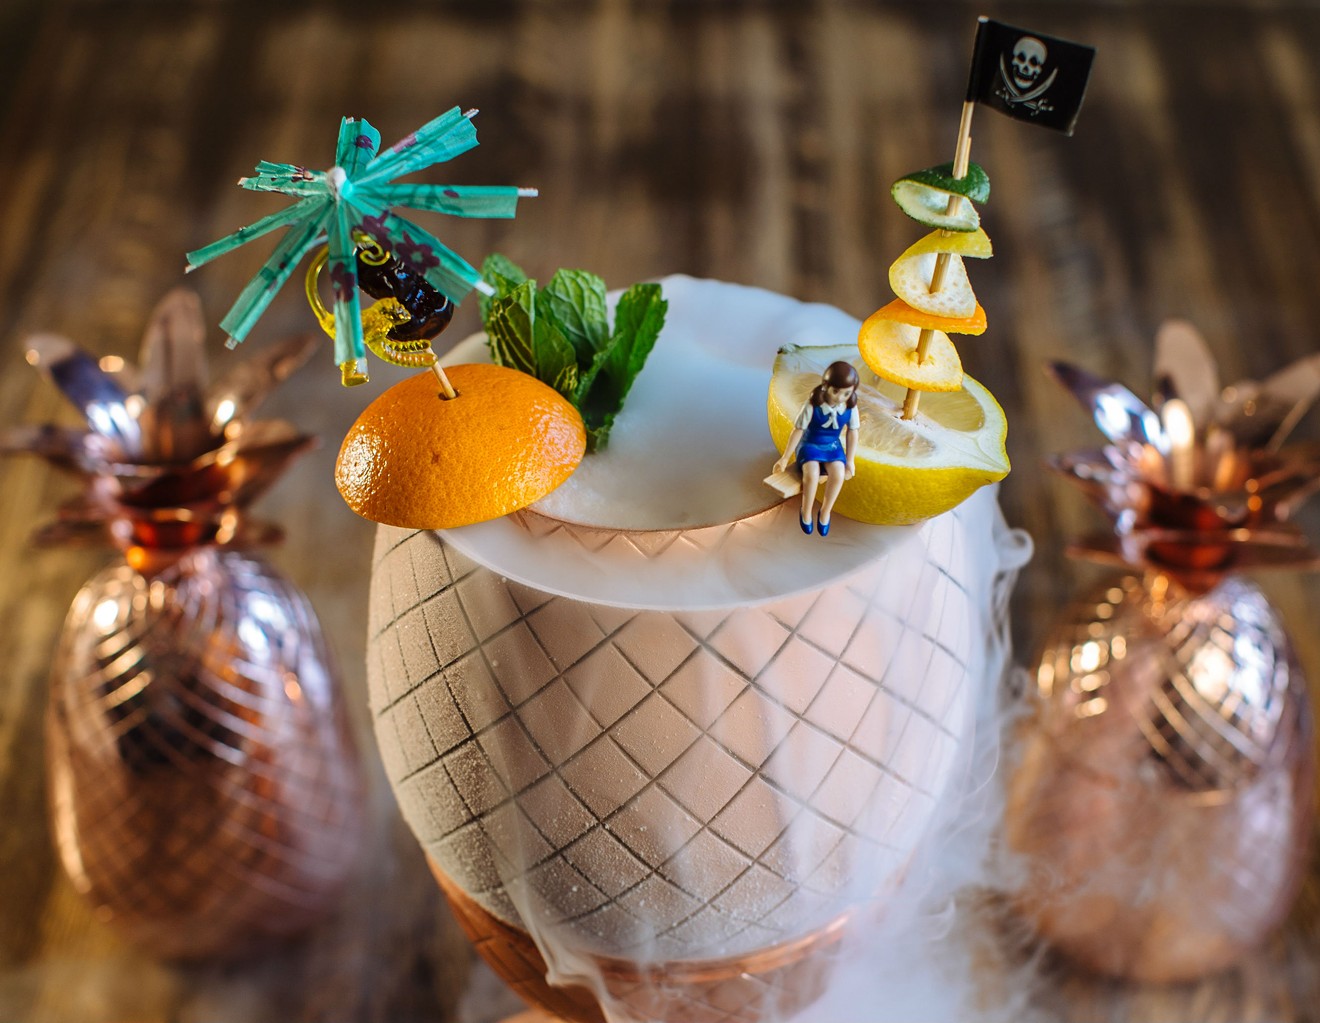 What has tiny umbrellas and novelty glassware? Dallas Tiki Week, of course.